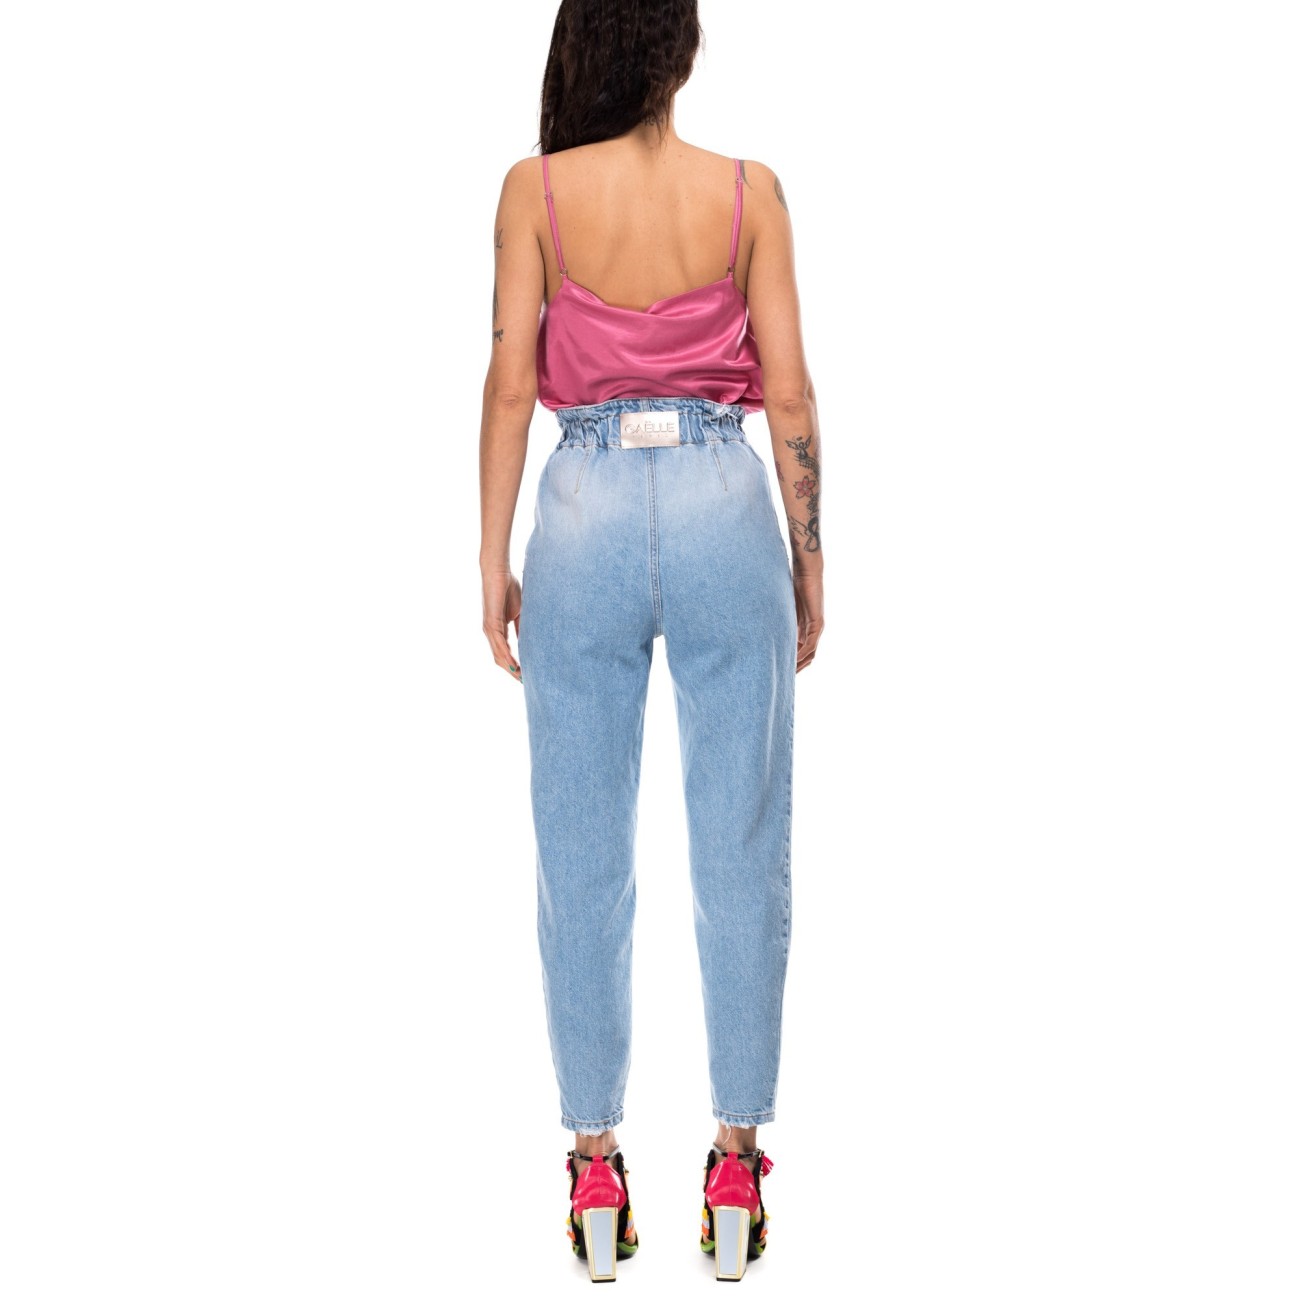 Gaelle slouchy jeans with...